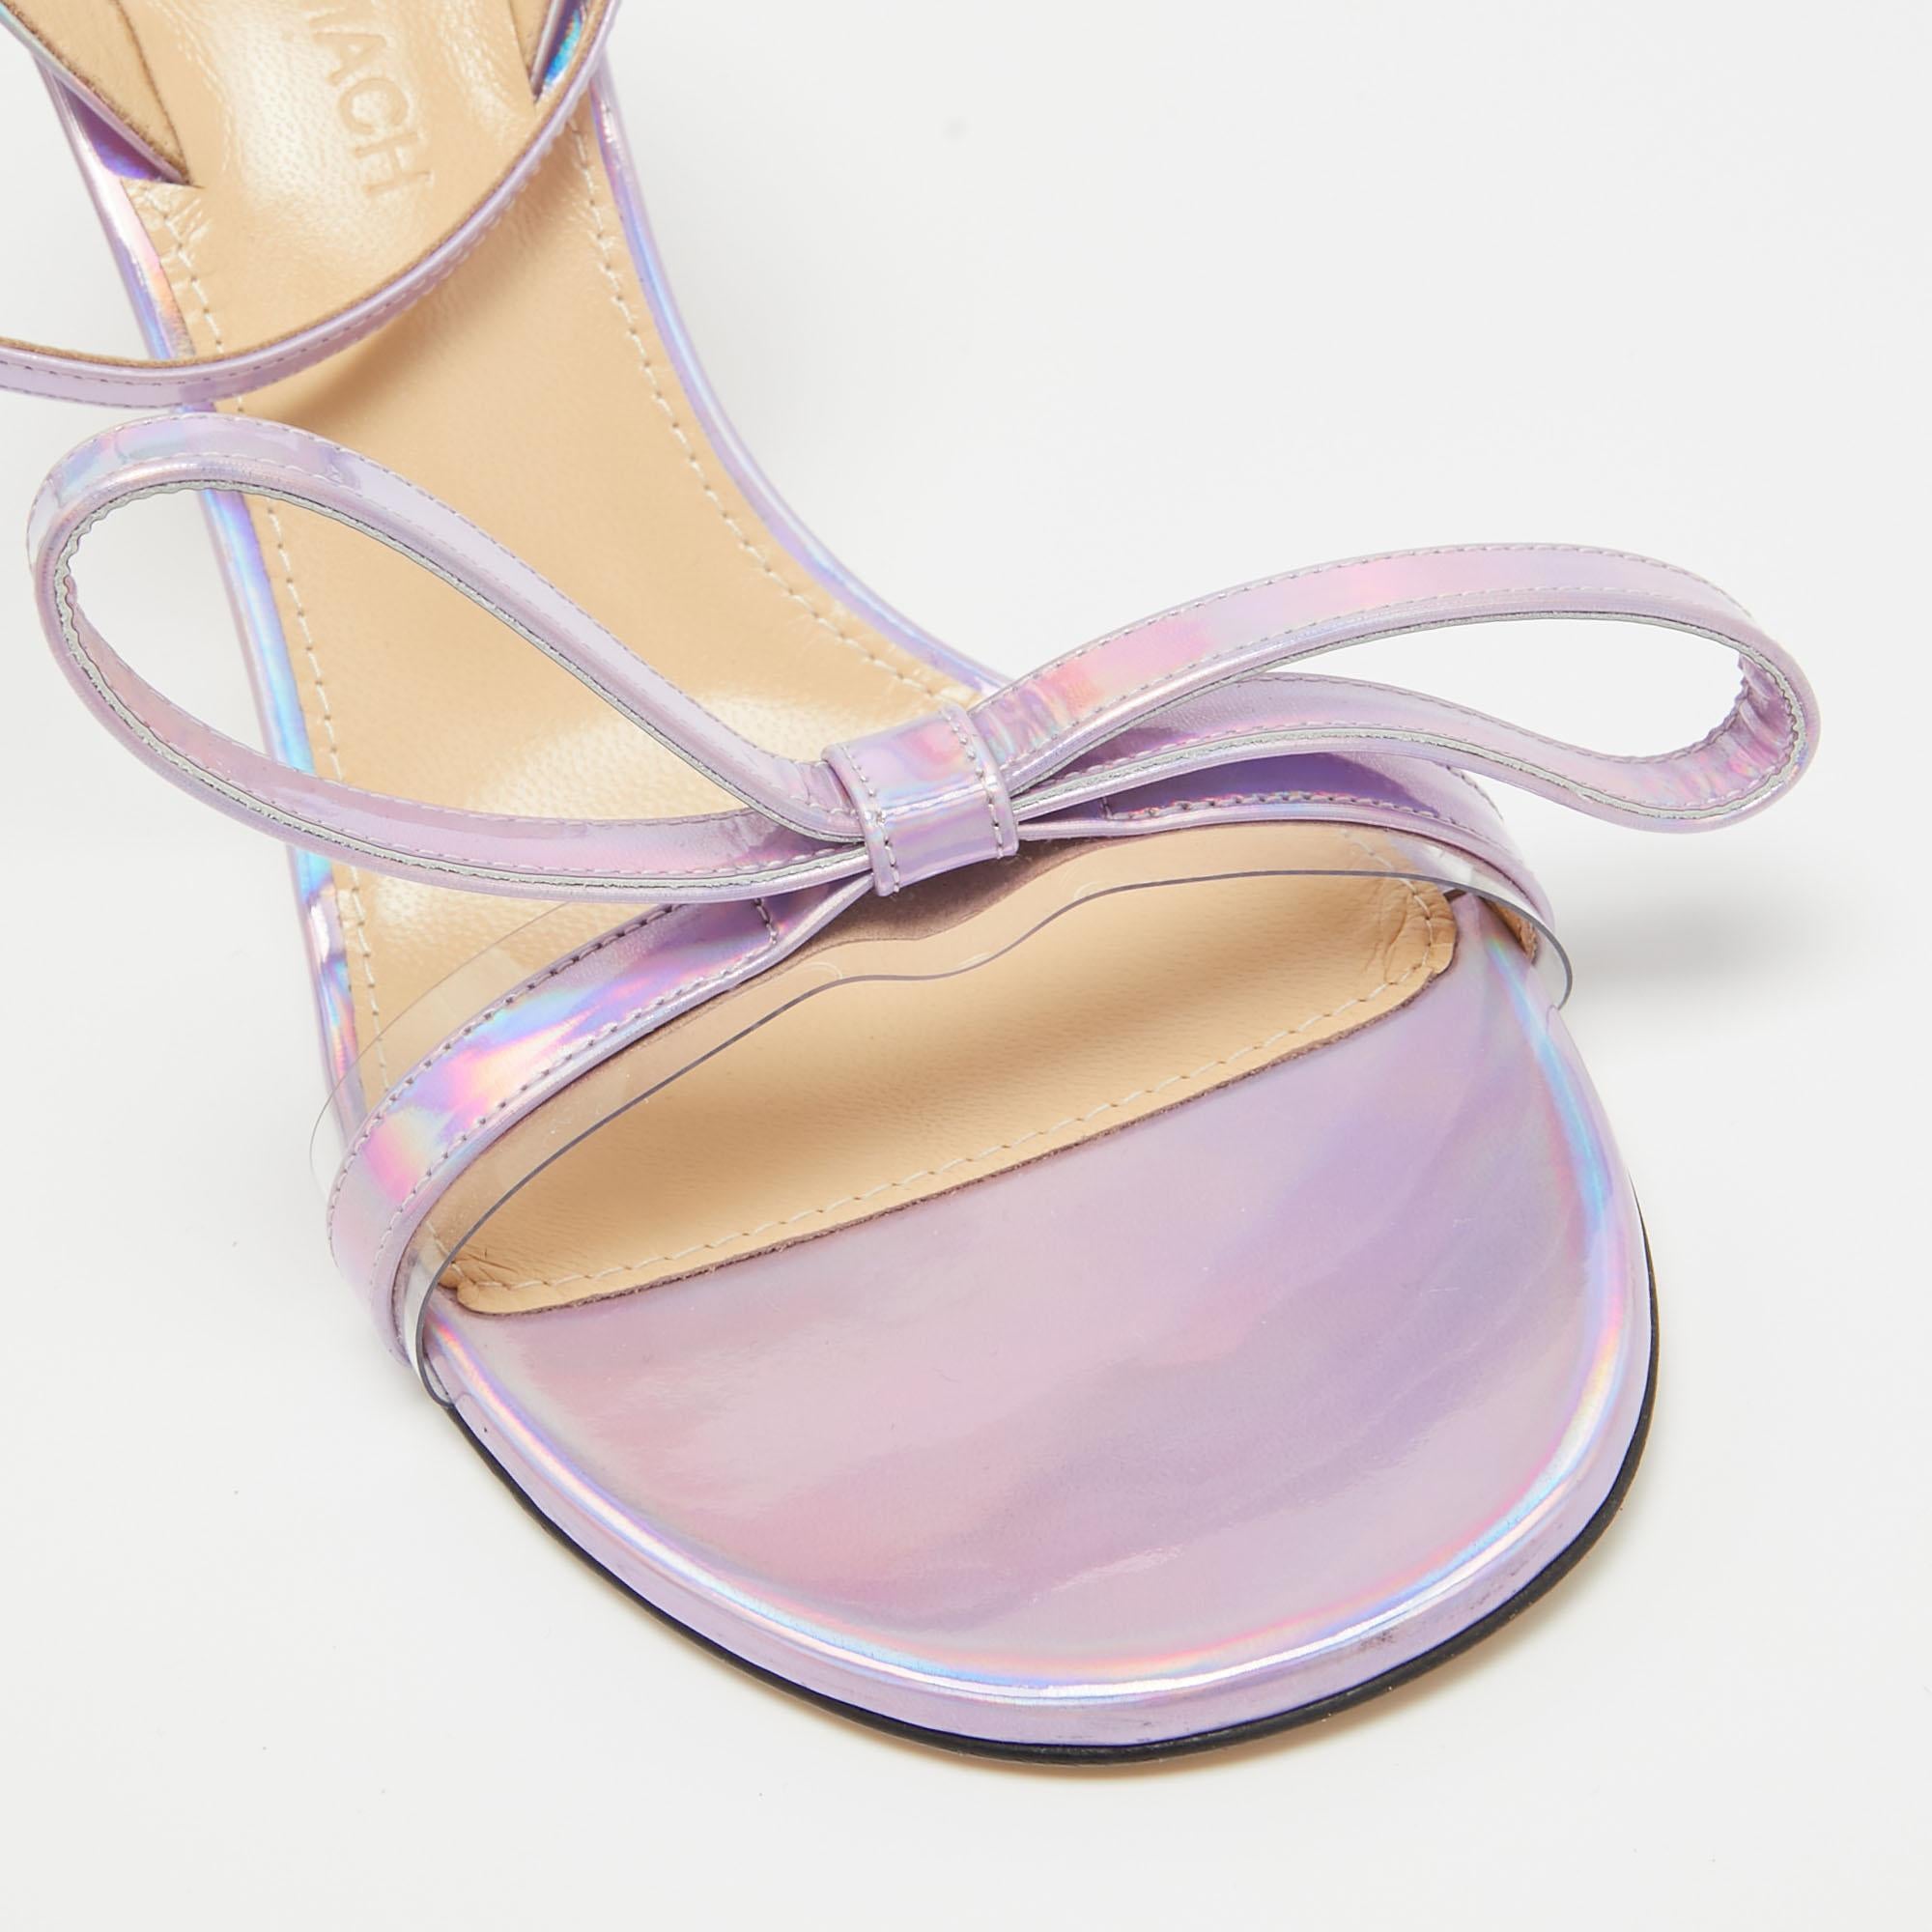 Mach & Mach Purple Iridescent Leather French Bow Sandals Size 39.5 For Sale 4